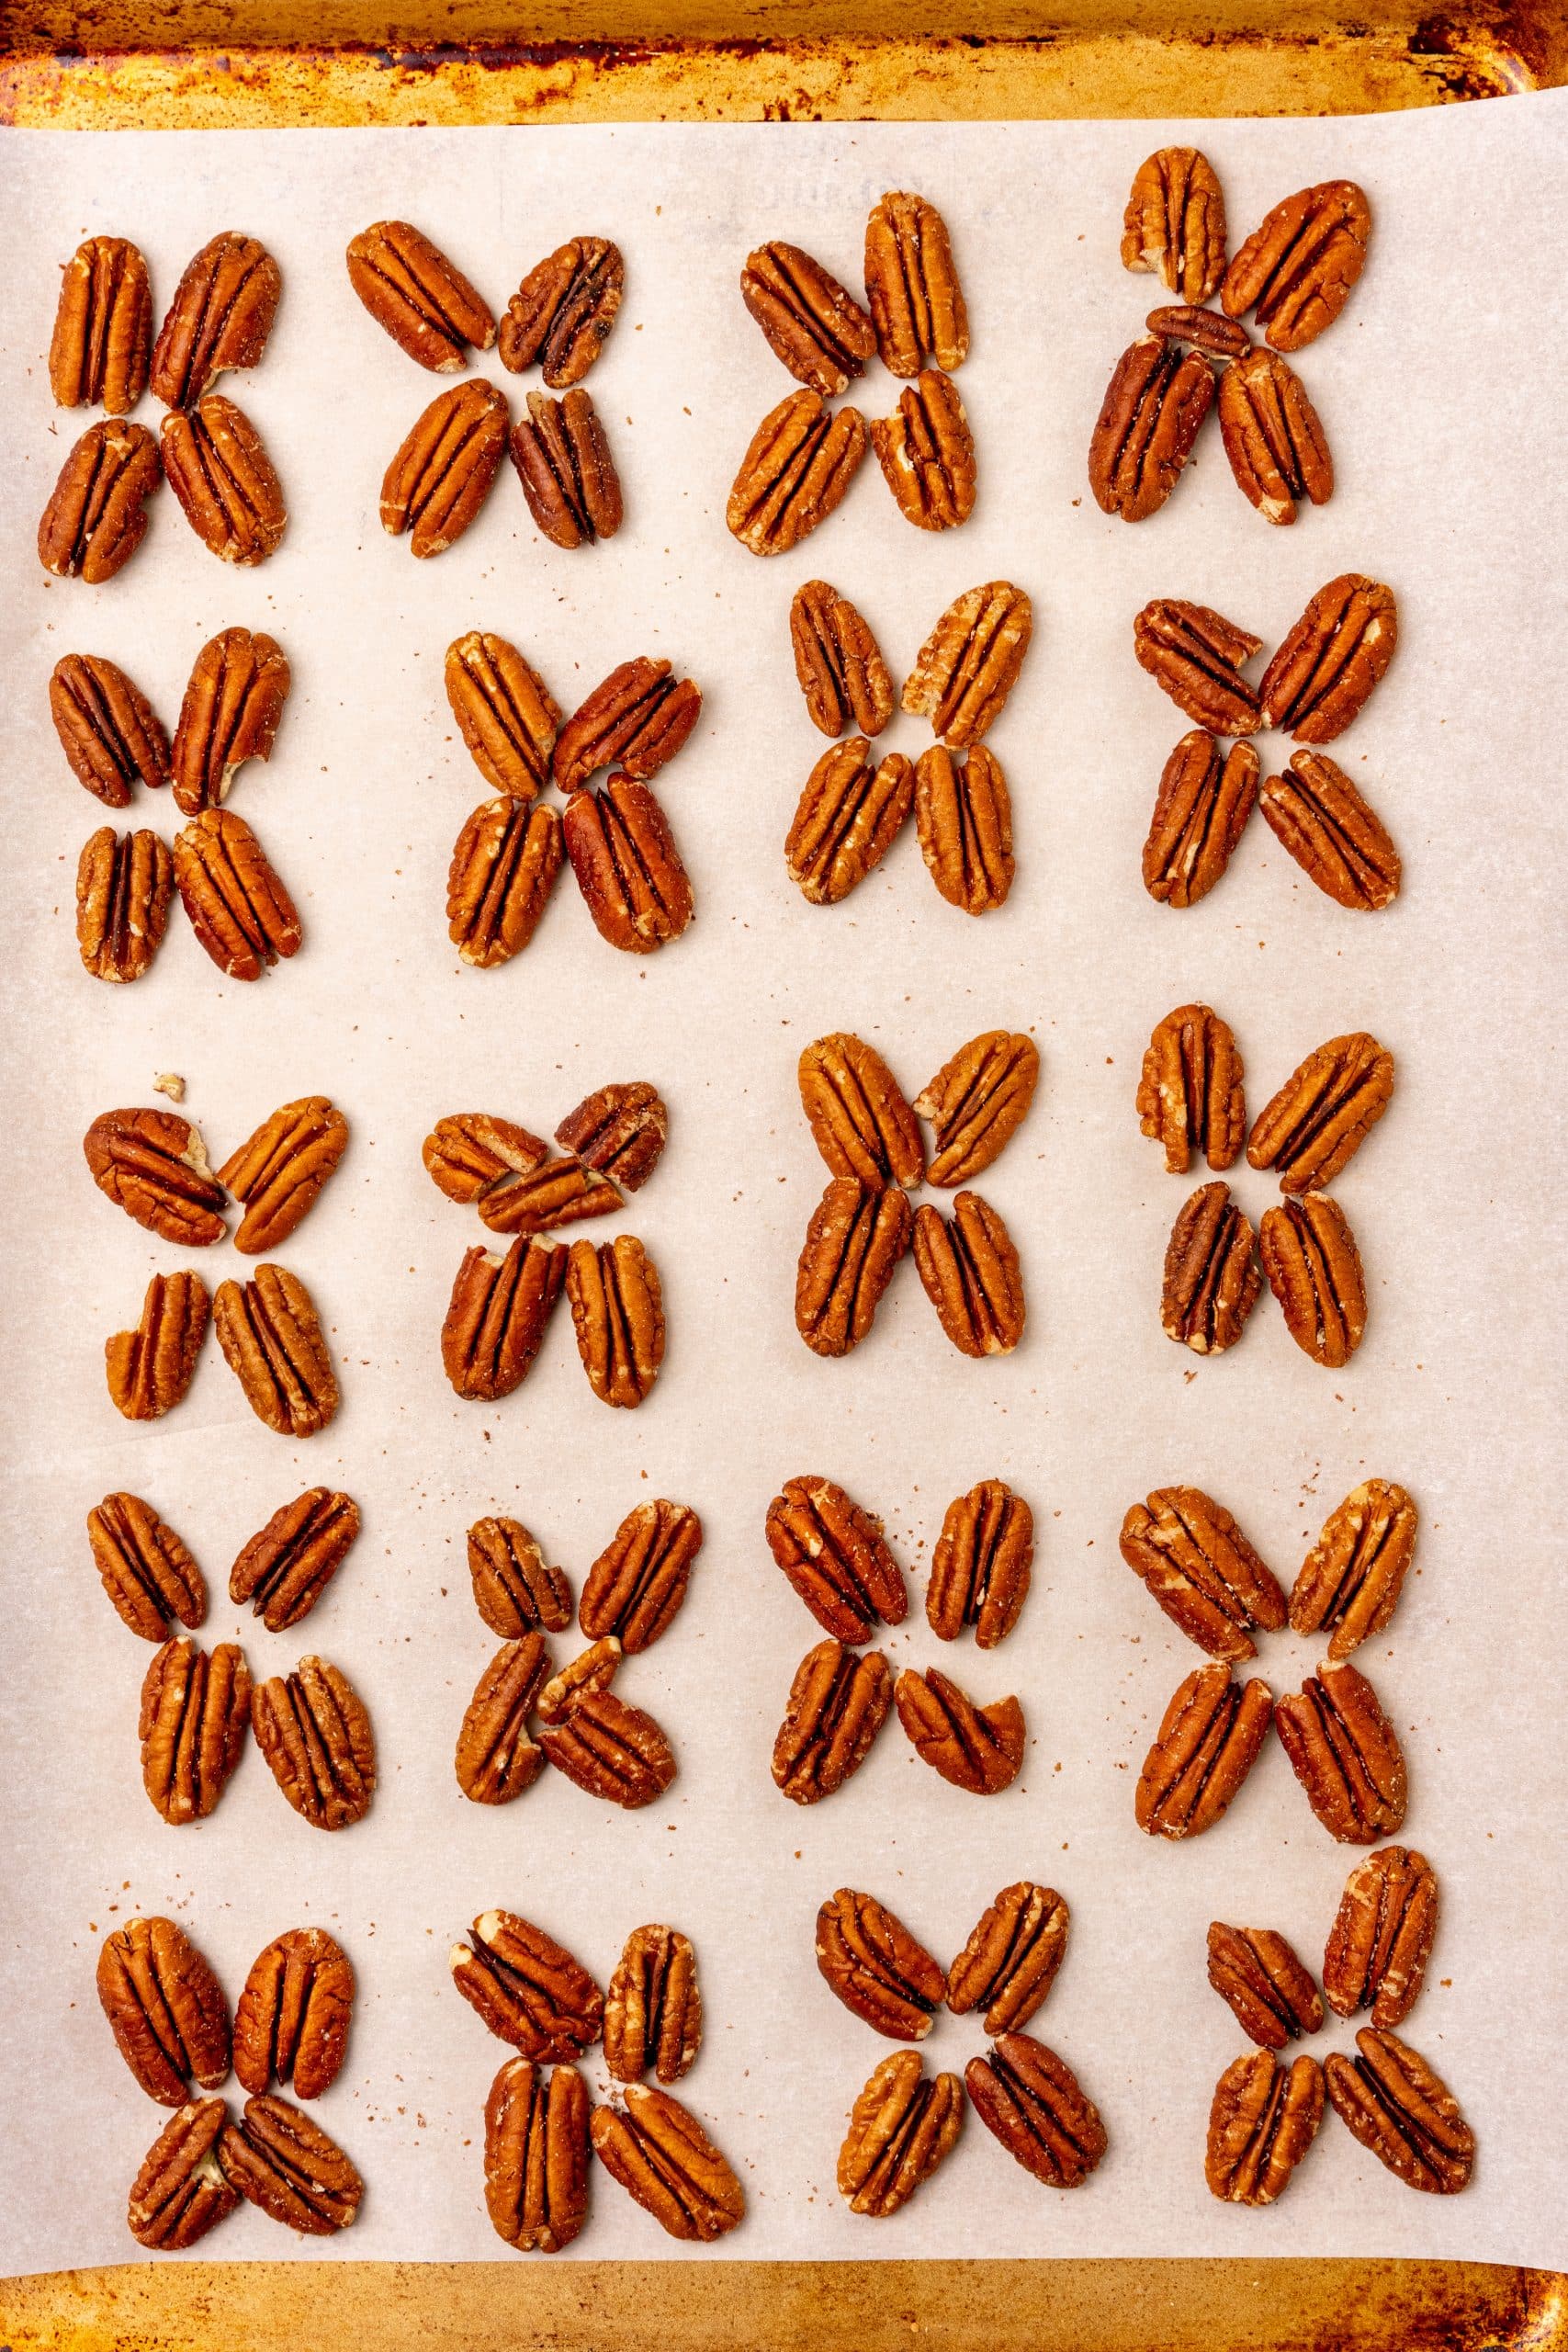 pecan halves arranged in an x pattern on a parchment lined baking sheet